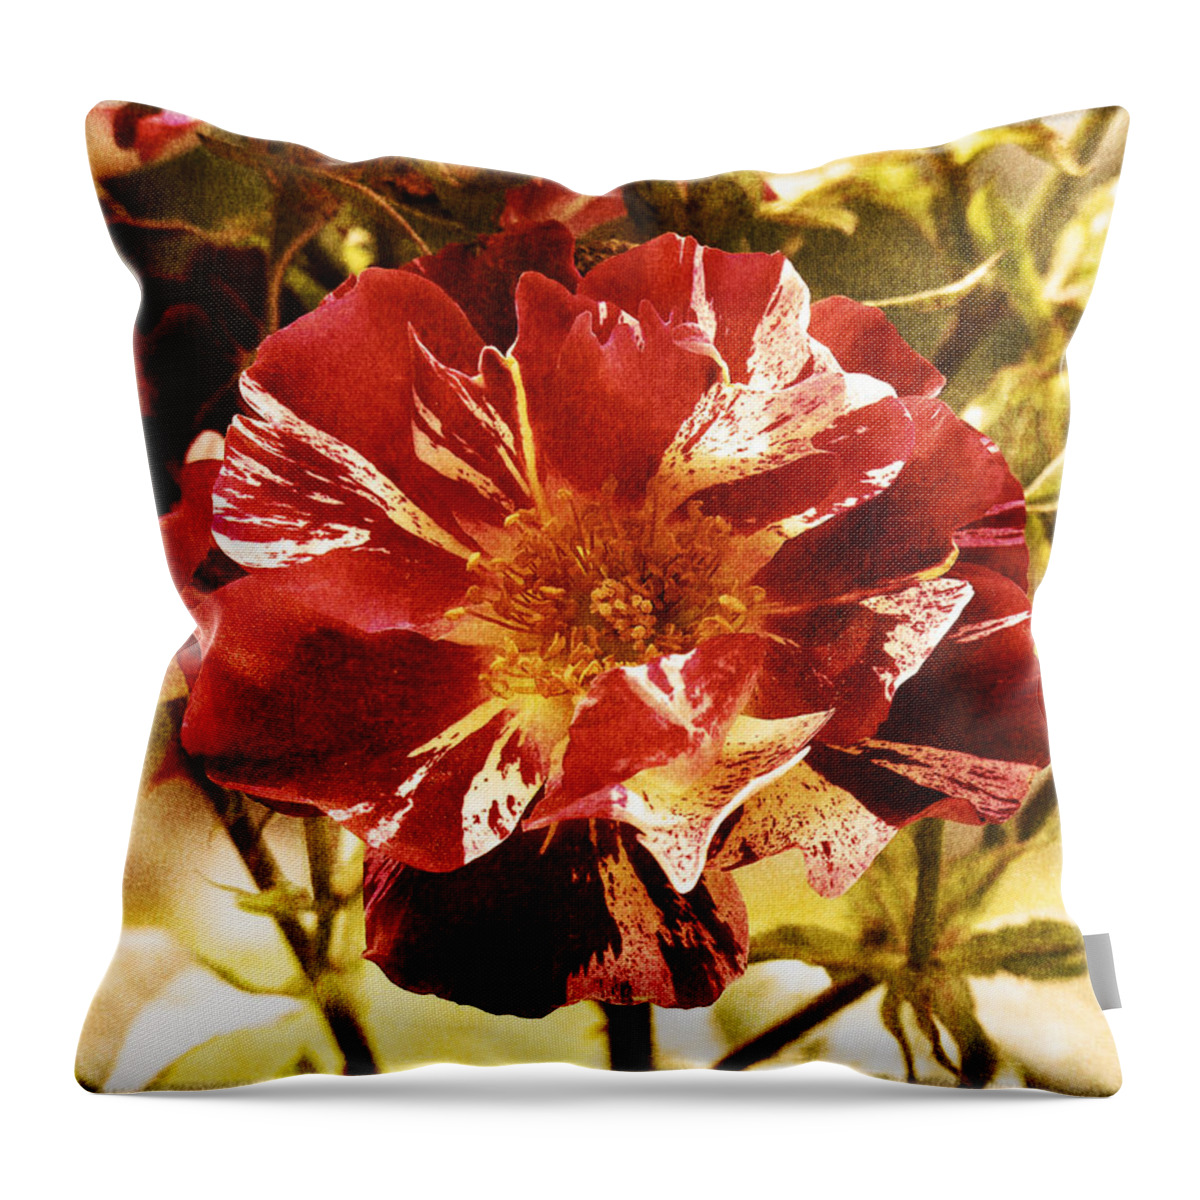 Vintage Style Throw Pillow featuring the photograph Vintage Rose #1 by Bonnie Bruno